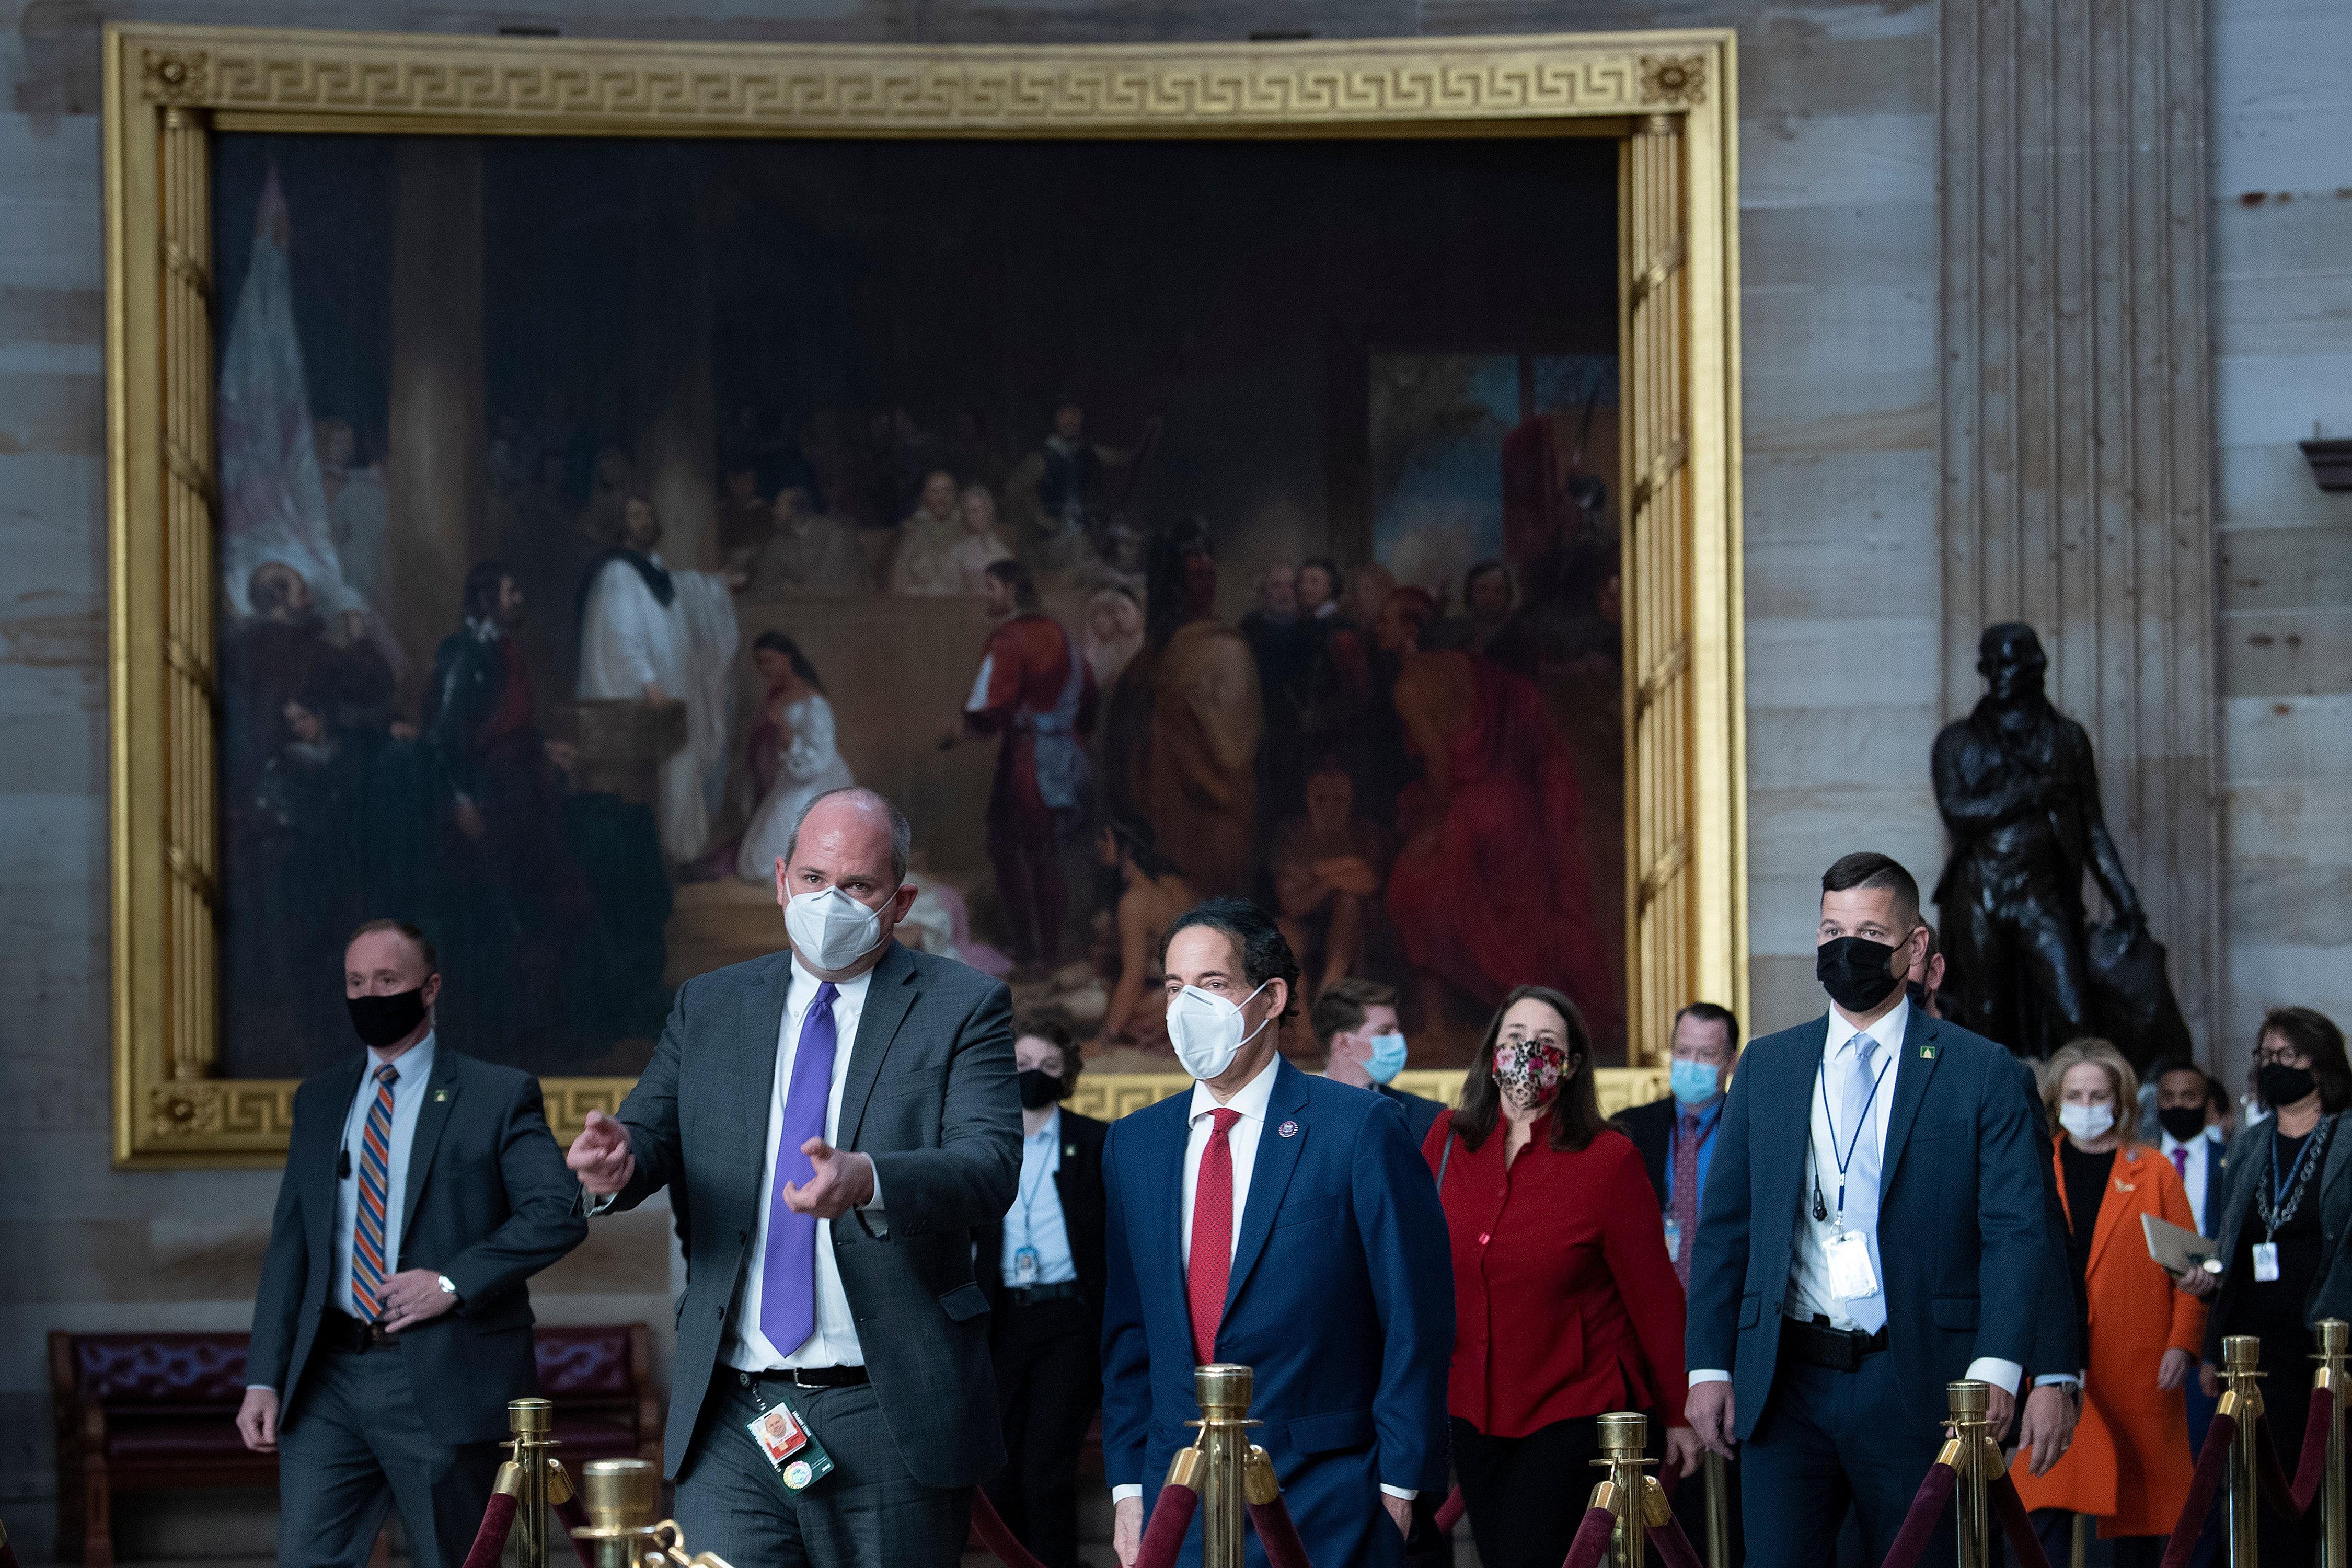 Raskin leads a group of people wearing masks past a large painting on a wall inside the Capitol